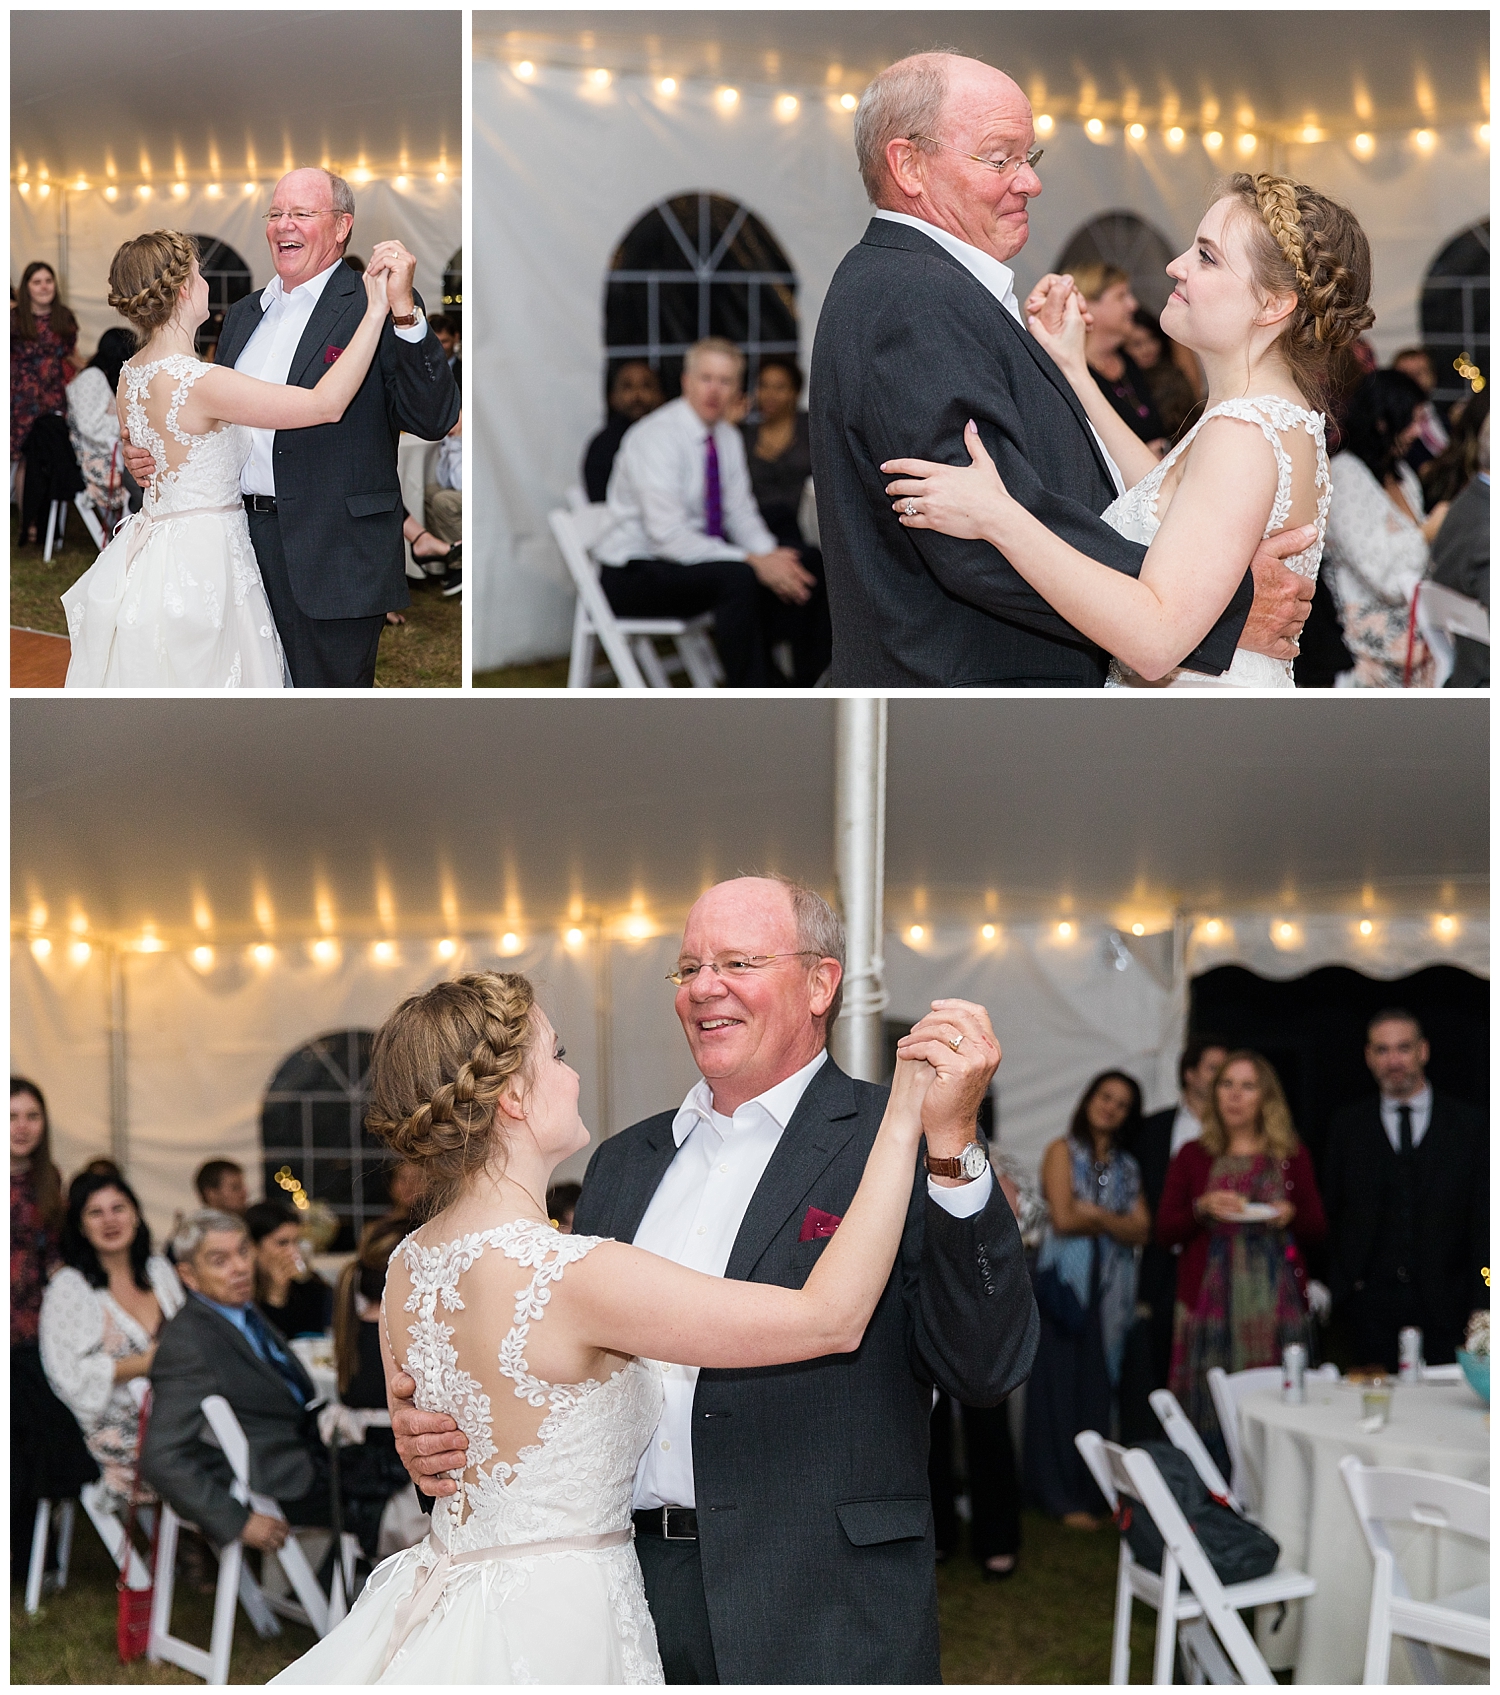 Father-Daughter dance at Goffstown, New Hampshire wedding at a private estate. Photography by Halie Olszowy.